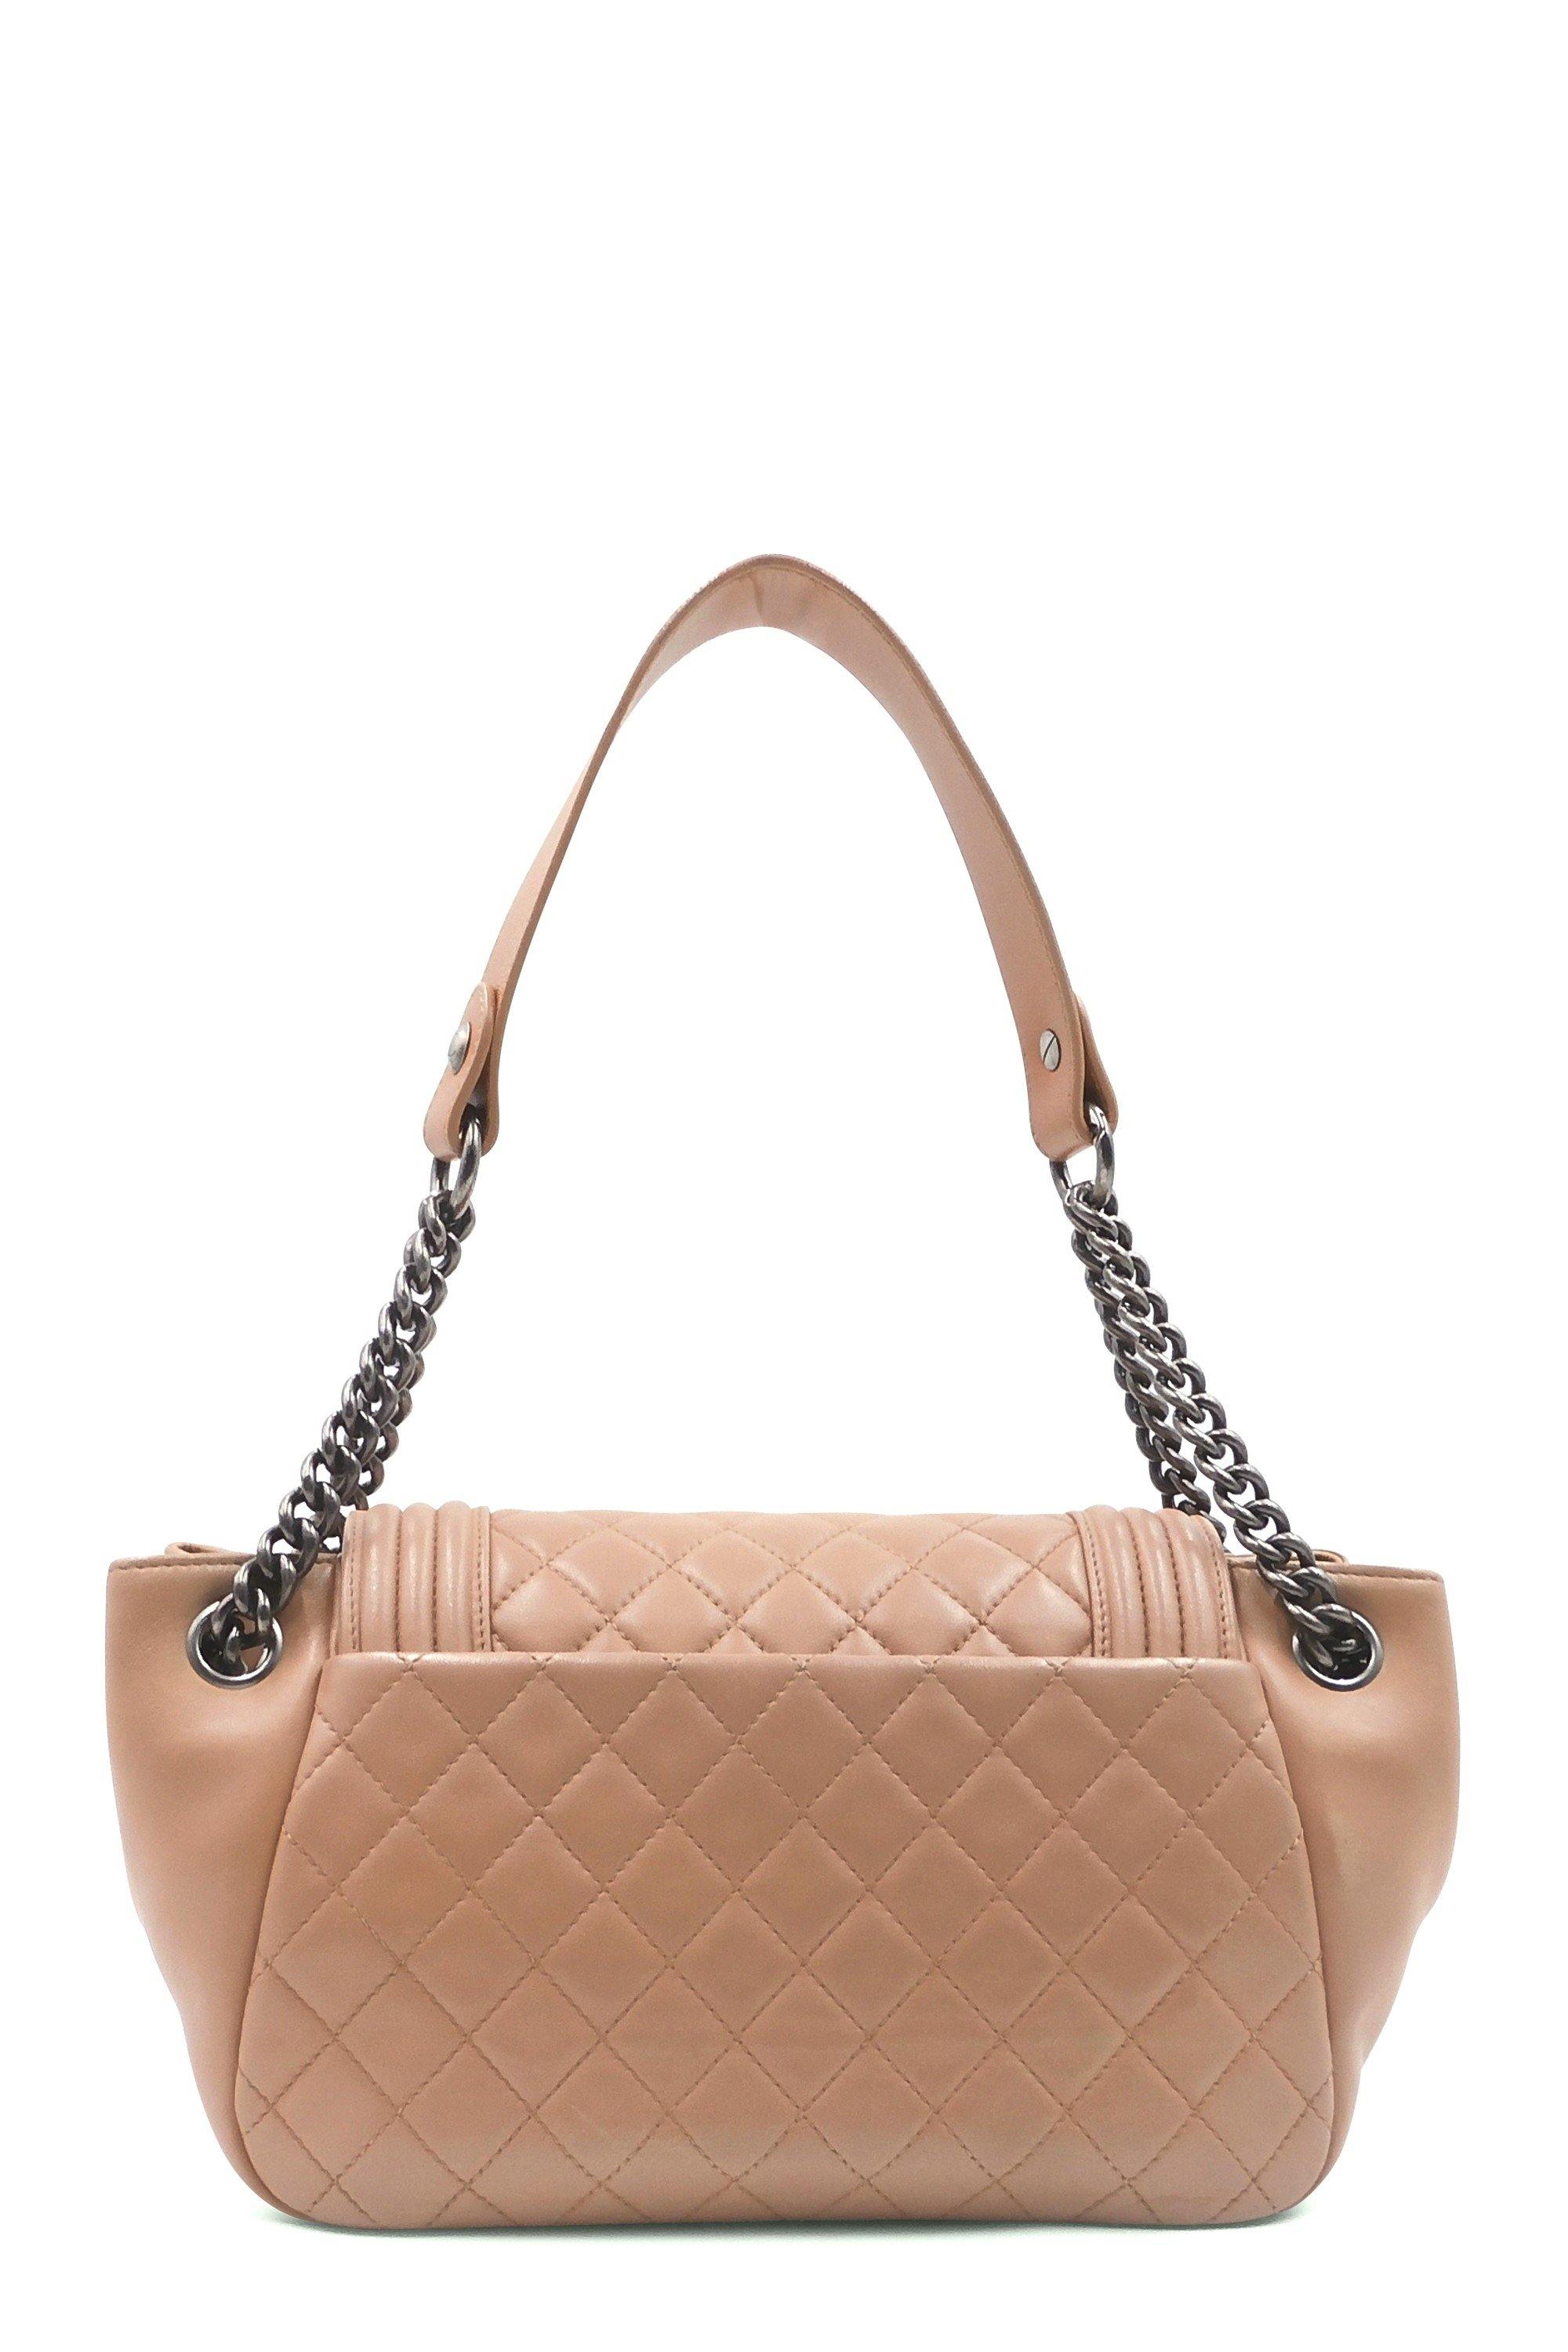 Chanel Puzzle Bag with Flap, Patent Black/Gold